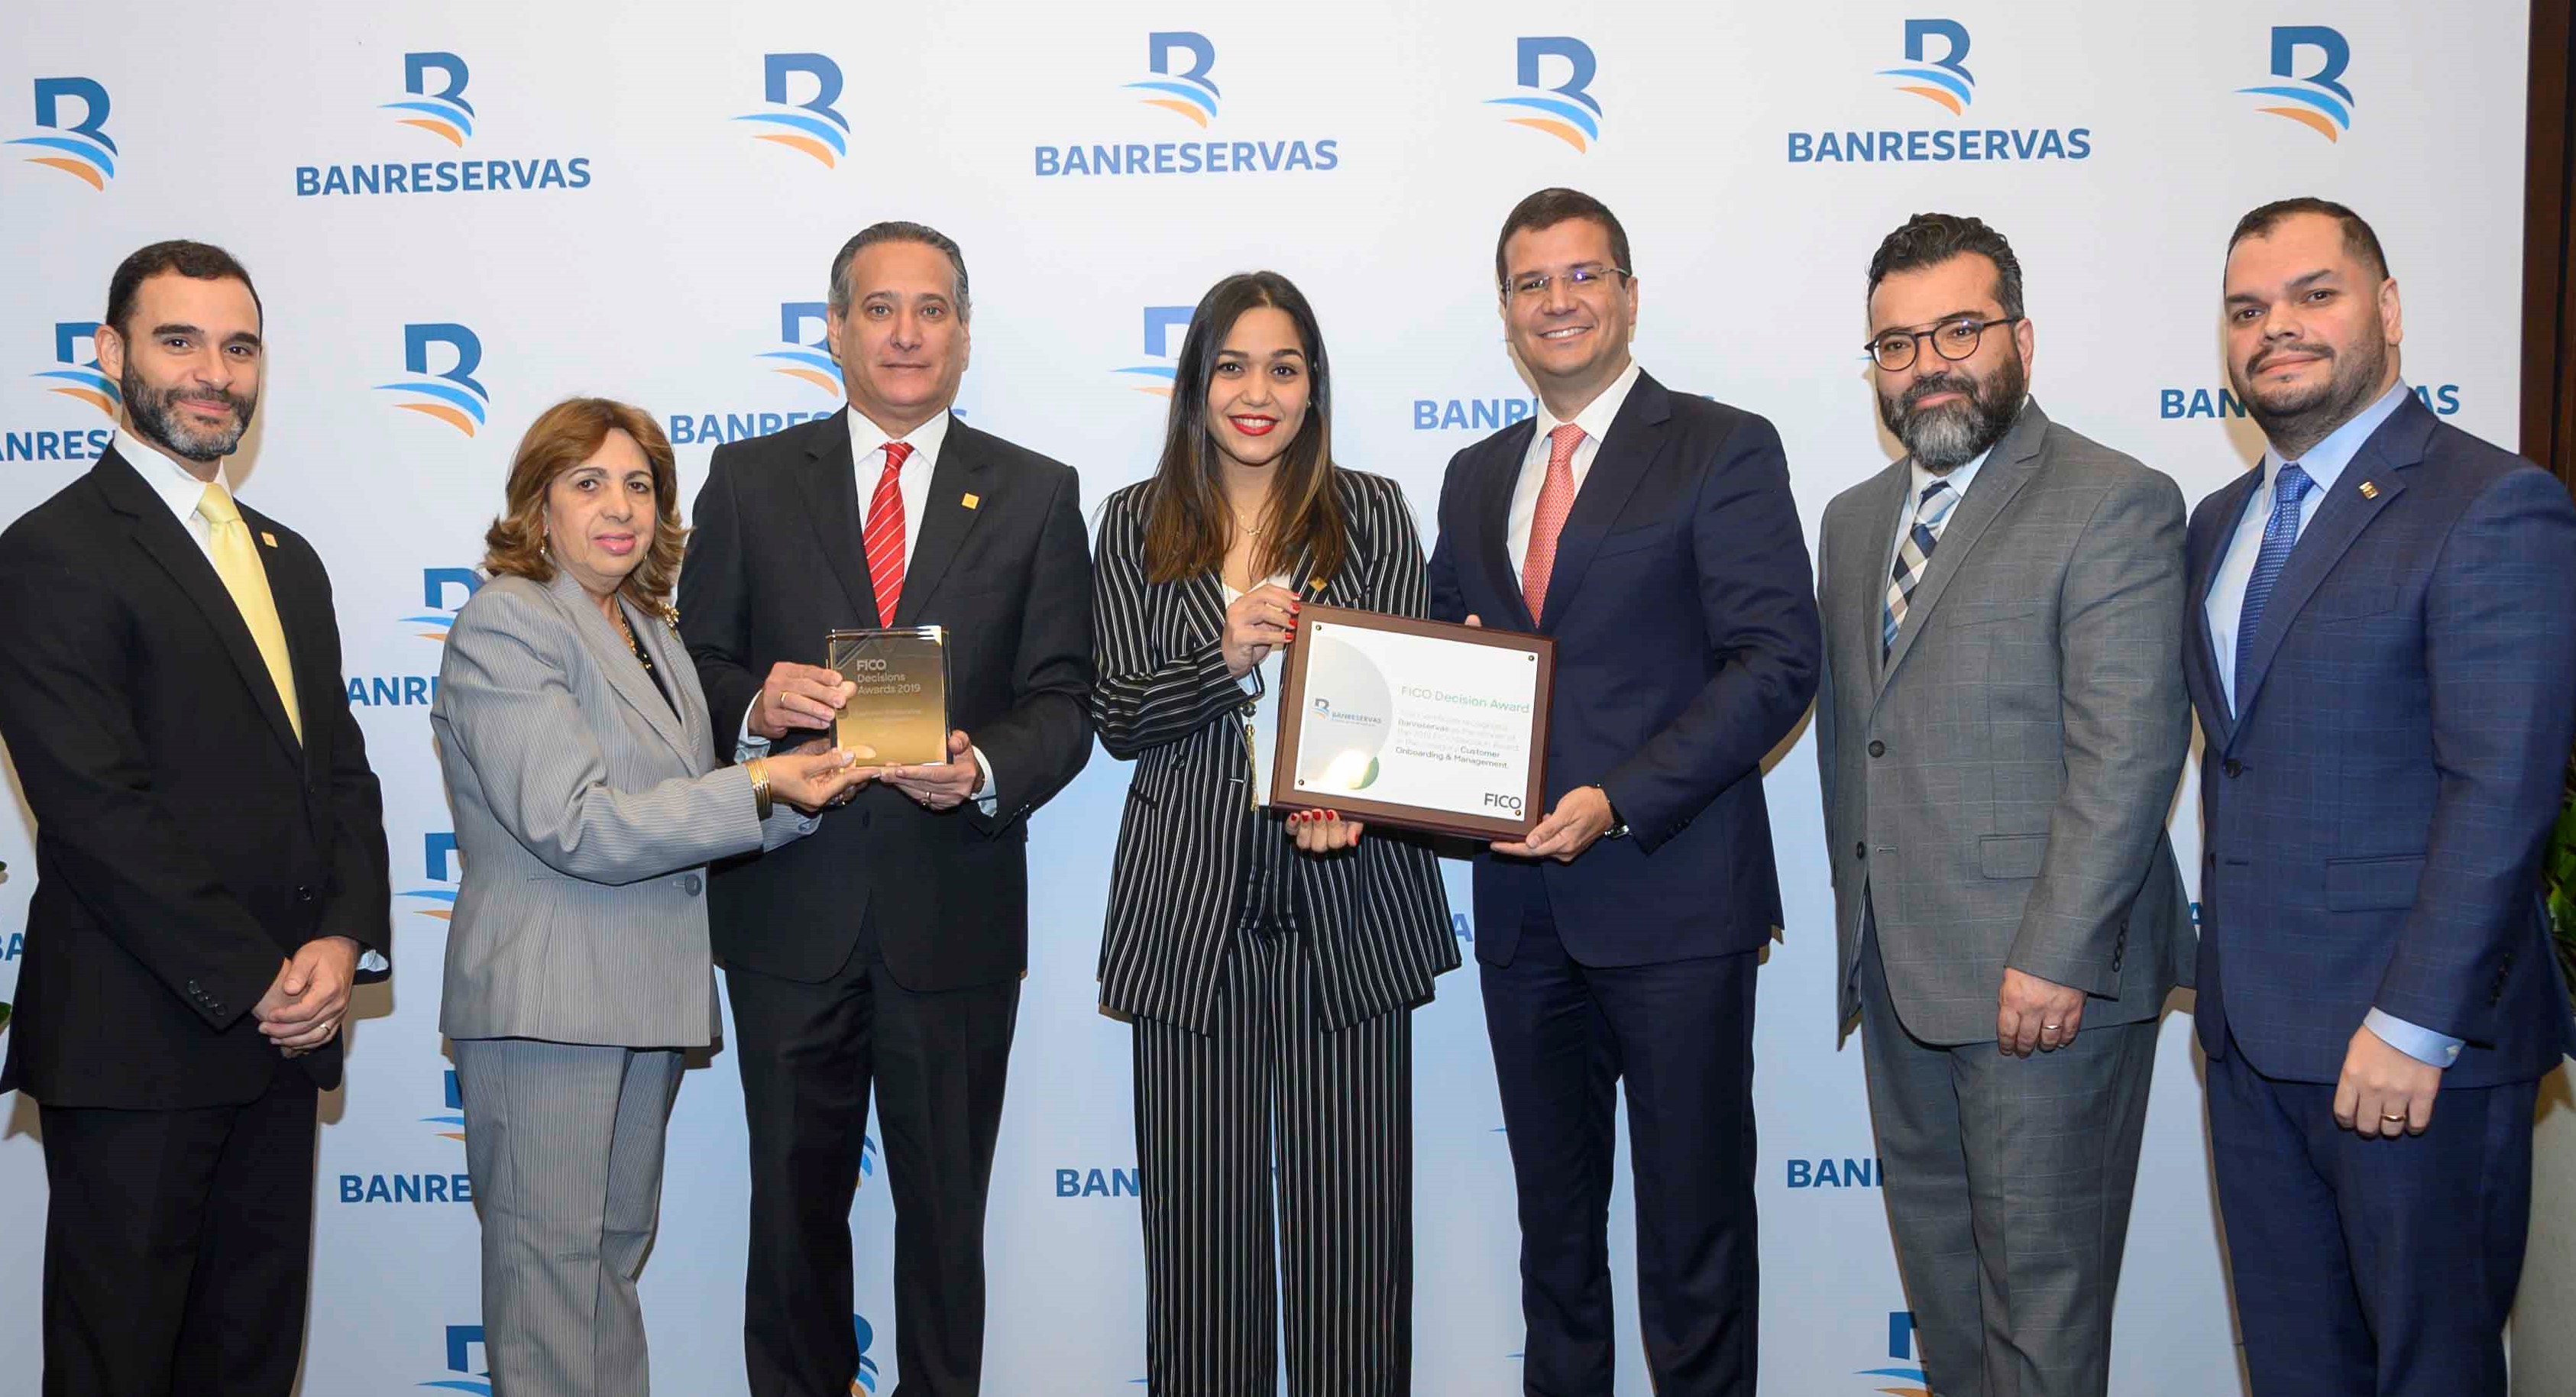 Banreservas Automates Loan Applications - wins FICO® Decisions Award for Customer Onboarding & Management